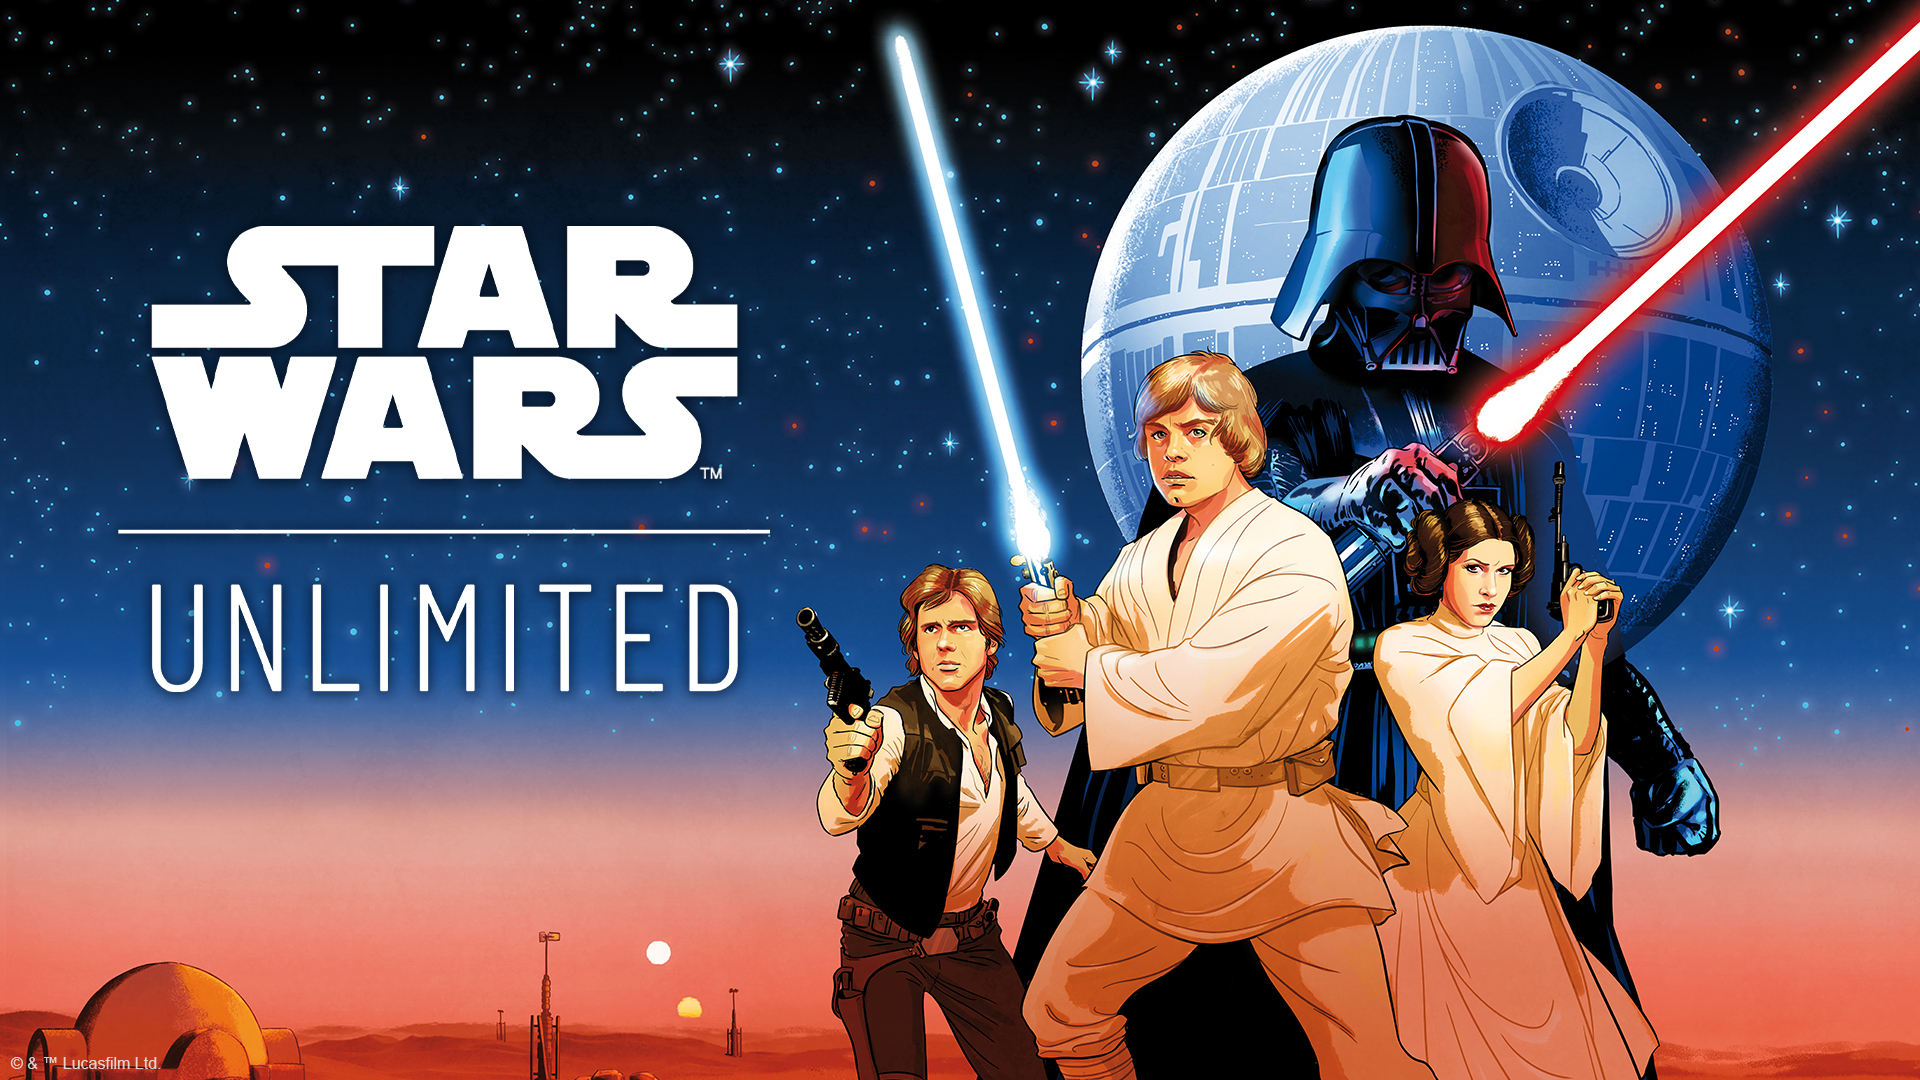 Key art for Star Wars: Unlimited shows Luke, Han, Leia, and Darth in a classic pose — weapons raised — in front of the Death Star. The style is cartoony, but realistic, with hints of the actual actors’ likenesses for good measure.